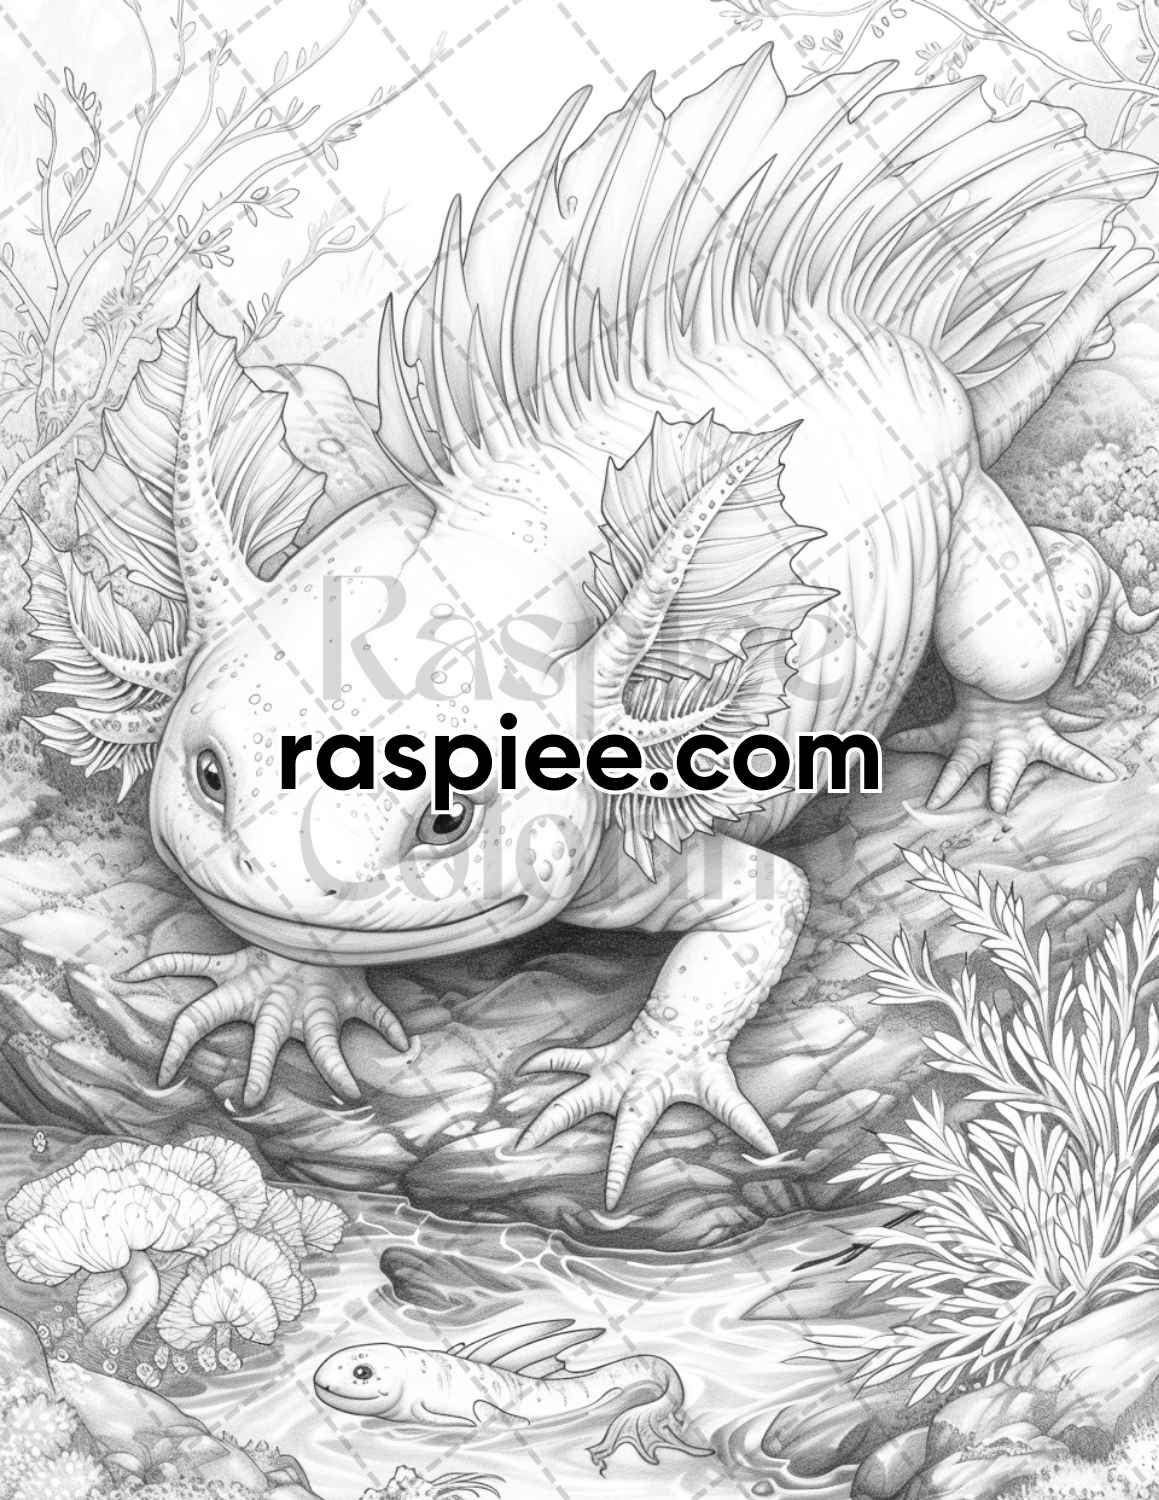 adult coloring pages, adult coloring sheets, adult coloring book pdf, adult coloring book printable, grayscale coloring pages, grayscale coloring books, animal art coloring pages for adults, animal coloring book, grayscale illustration, fantasy adult coloring pages, axolotl coloring pages, fantasy coloring book